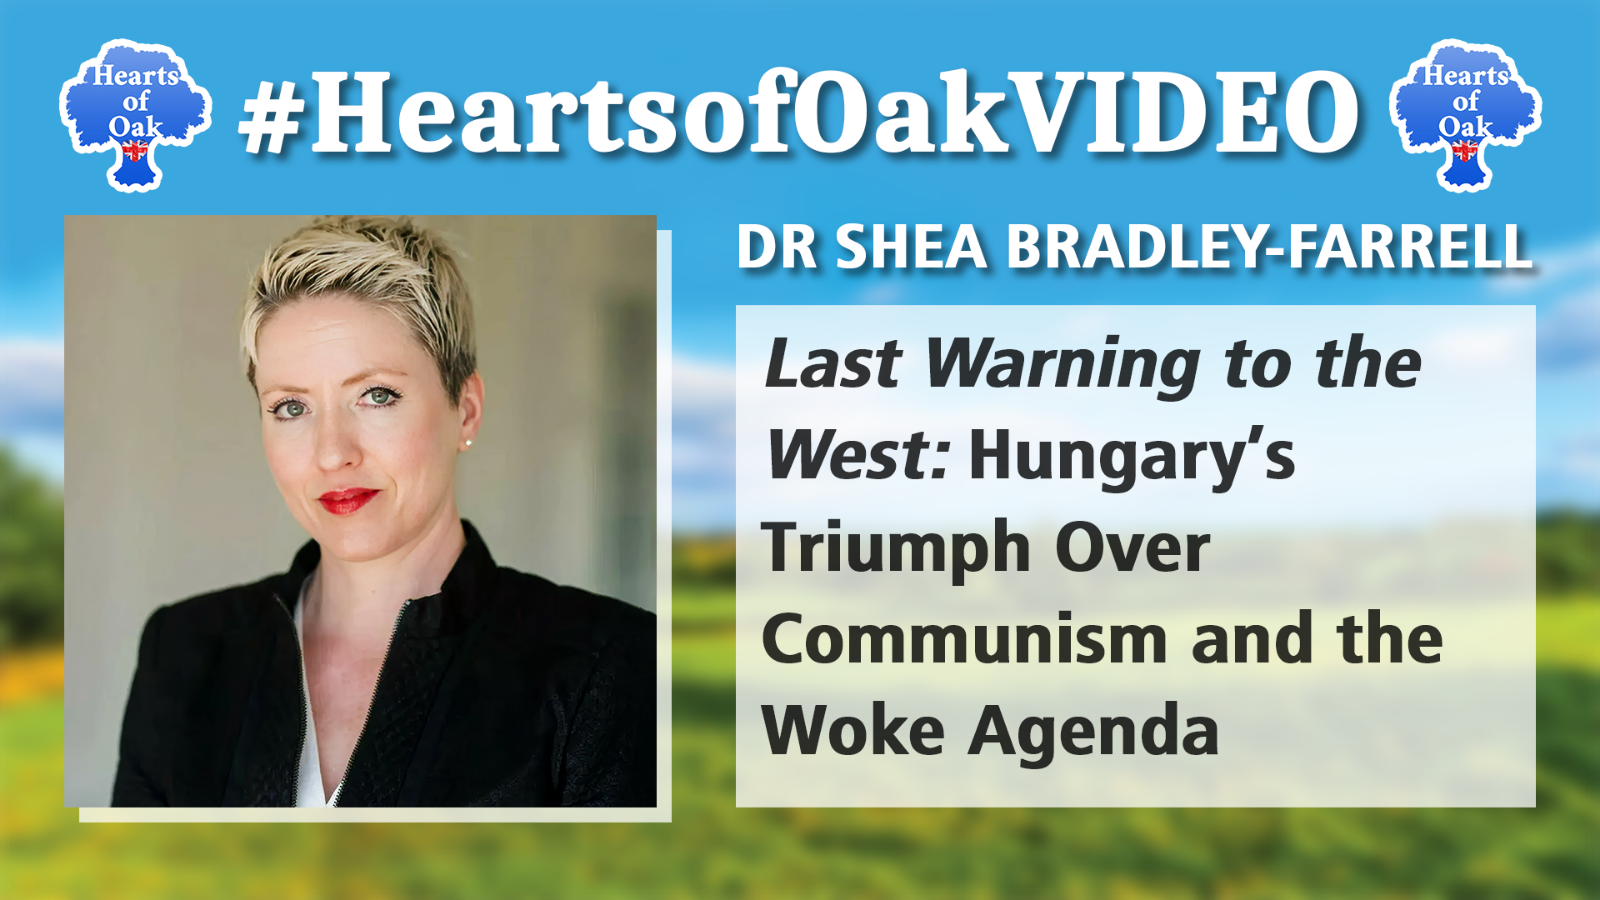 Dr Shea Bradley-Farrell - Last Warning to the West: Hungary’s Triumph Over Communism and Woke Agenda